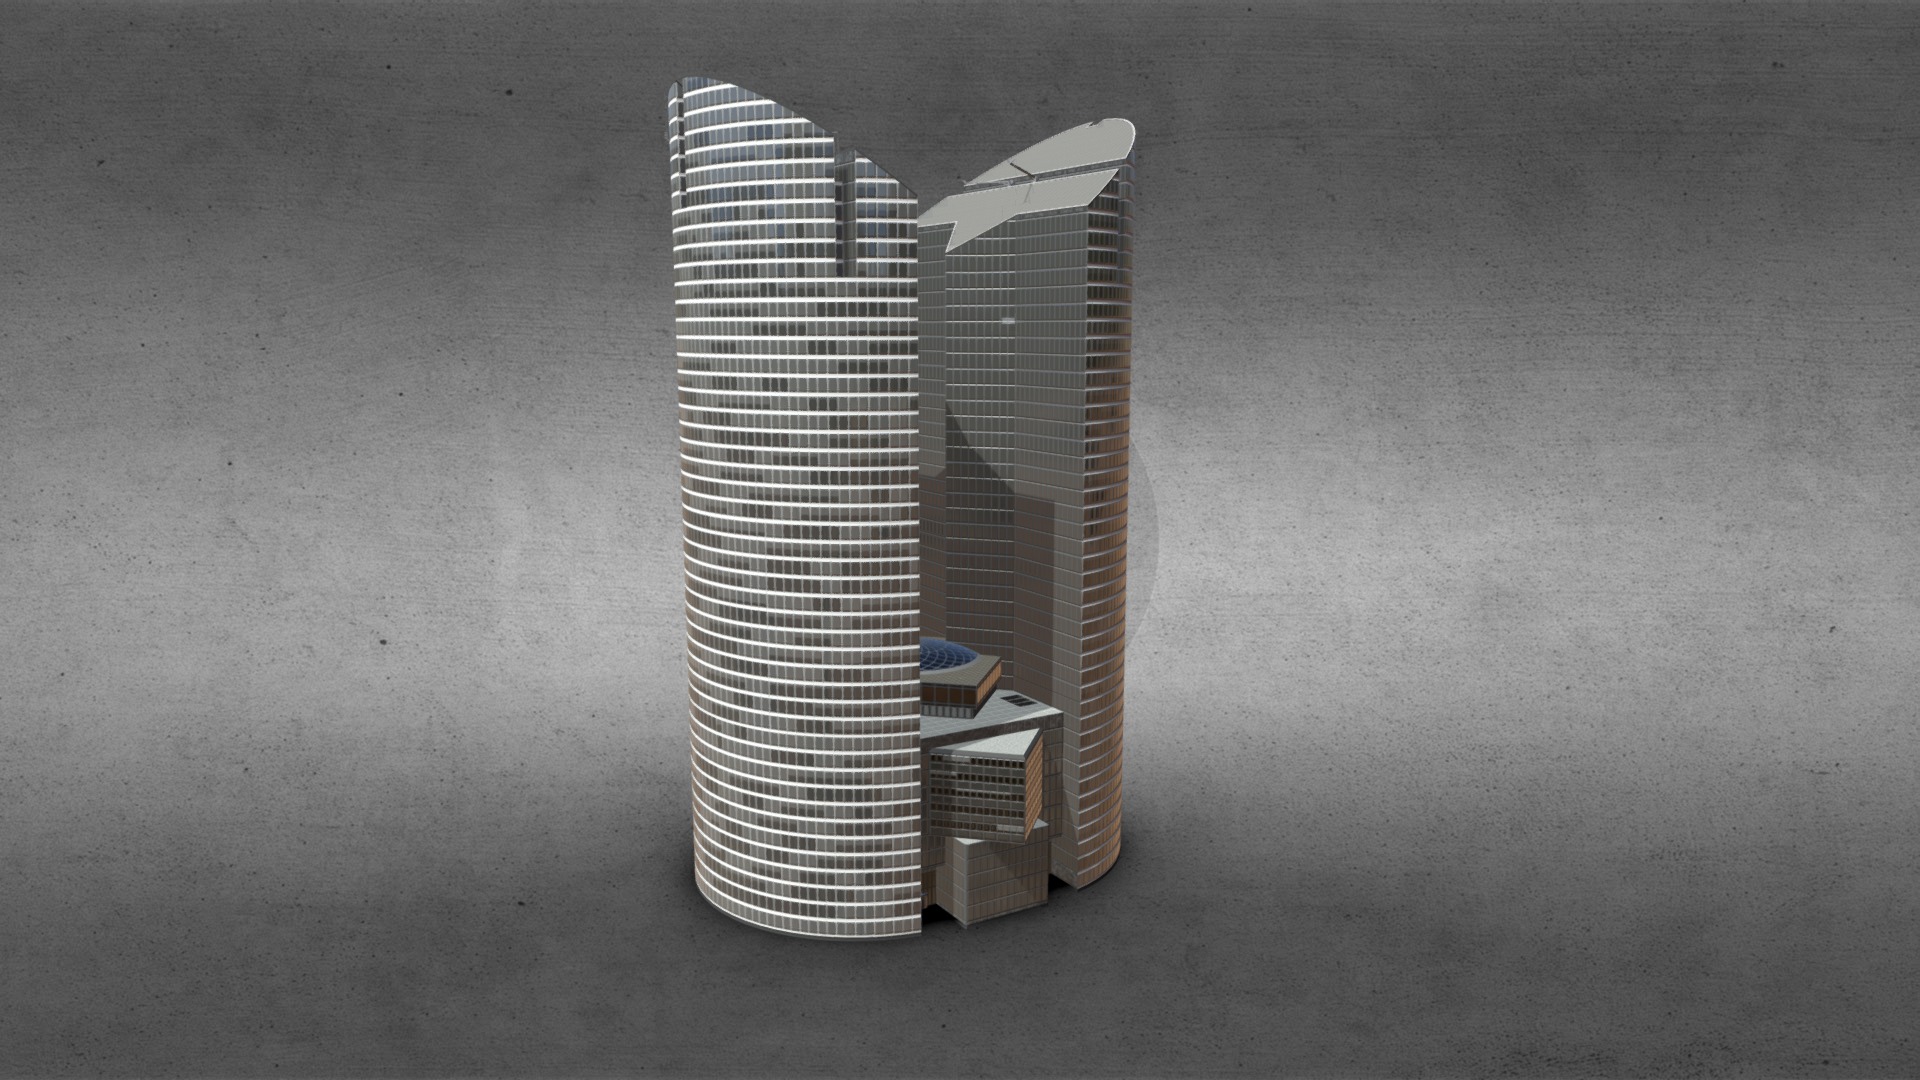 3D model Alicante & Chassagne Tower – La Défense Paris - This is a 3D model of the Alicante & Chassagne Tower - La Défense Paris. The 3D model is about a tall tower with a basket.